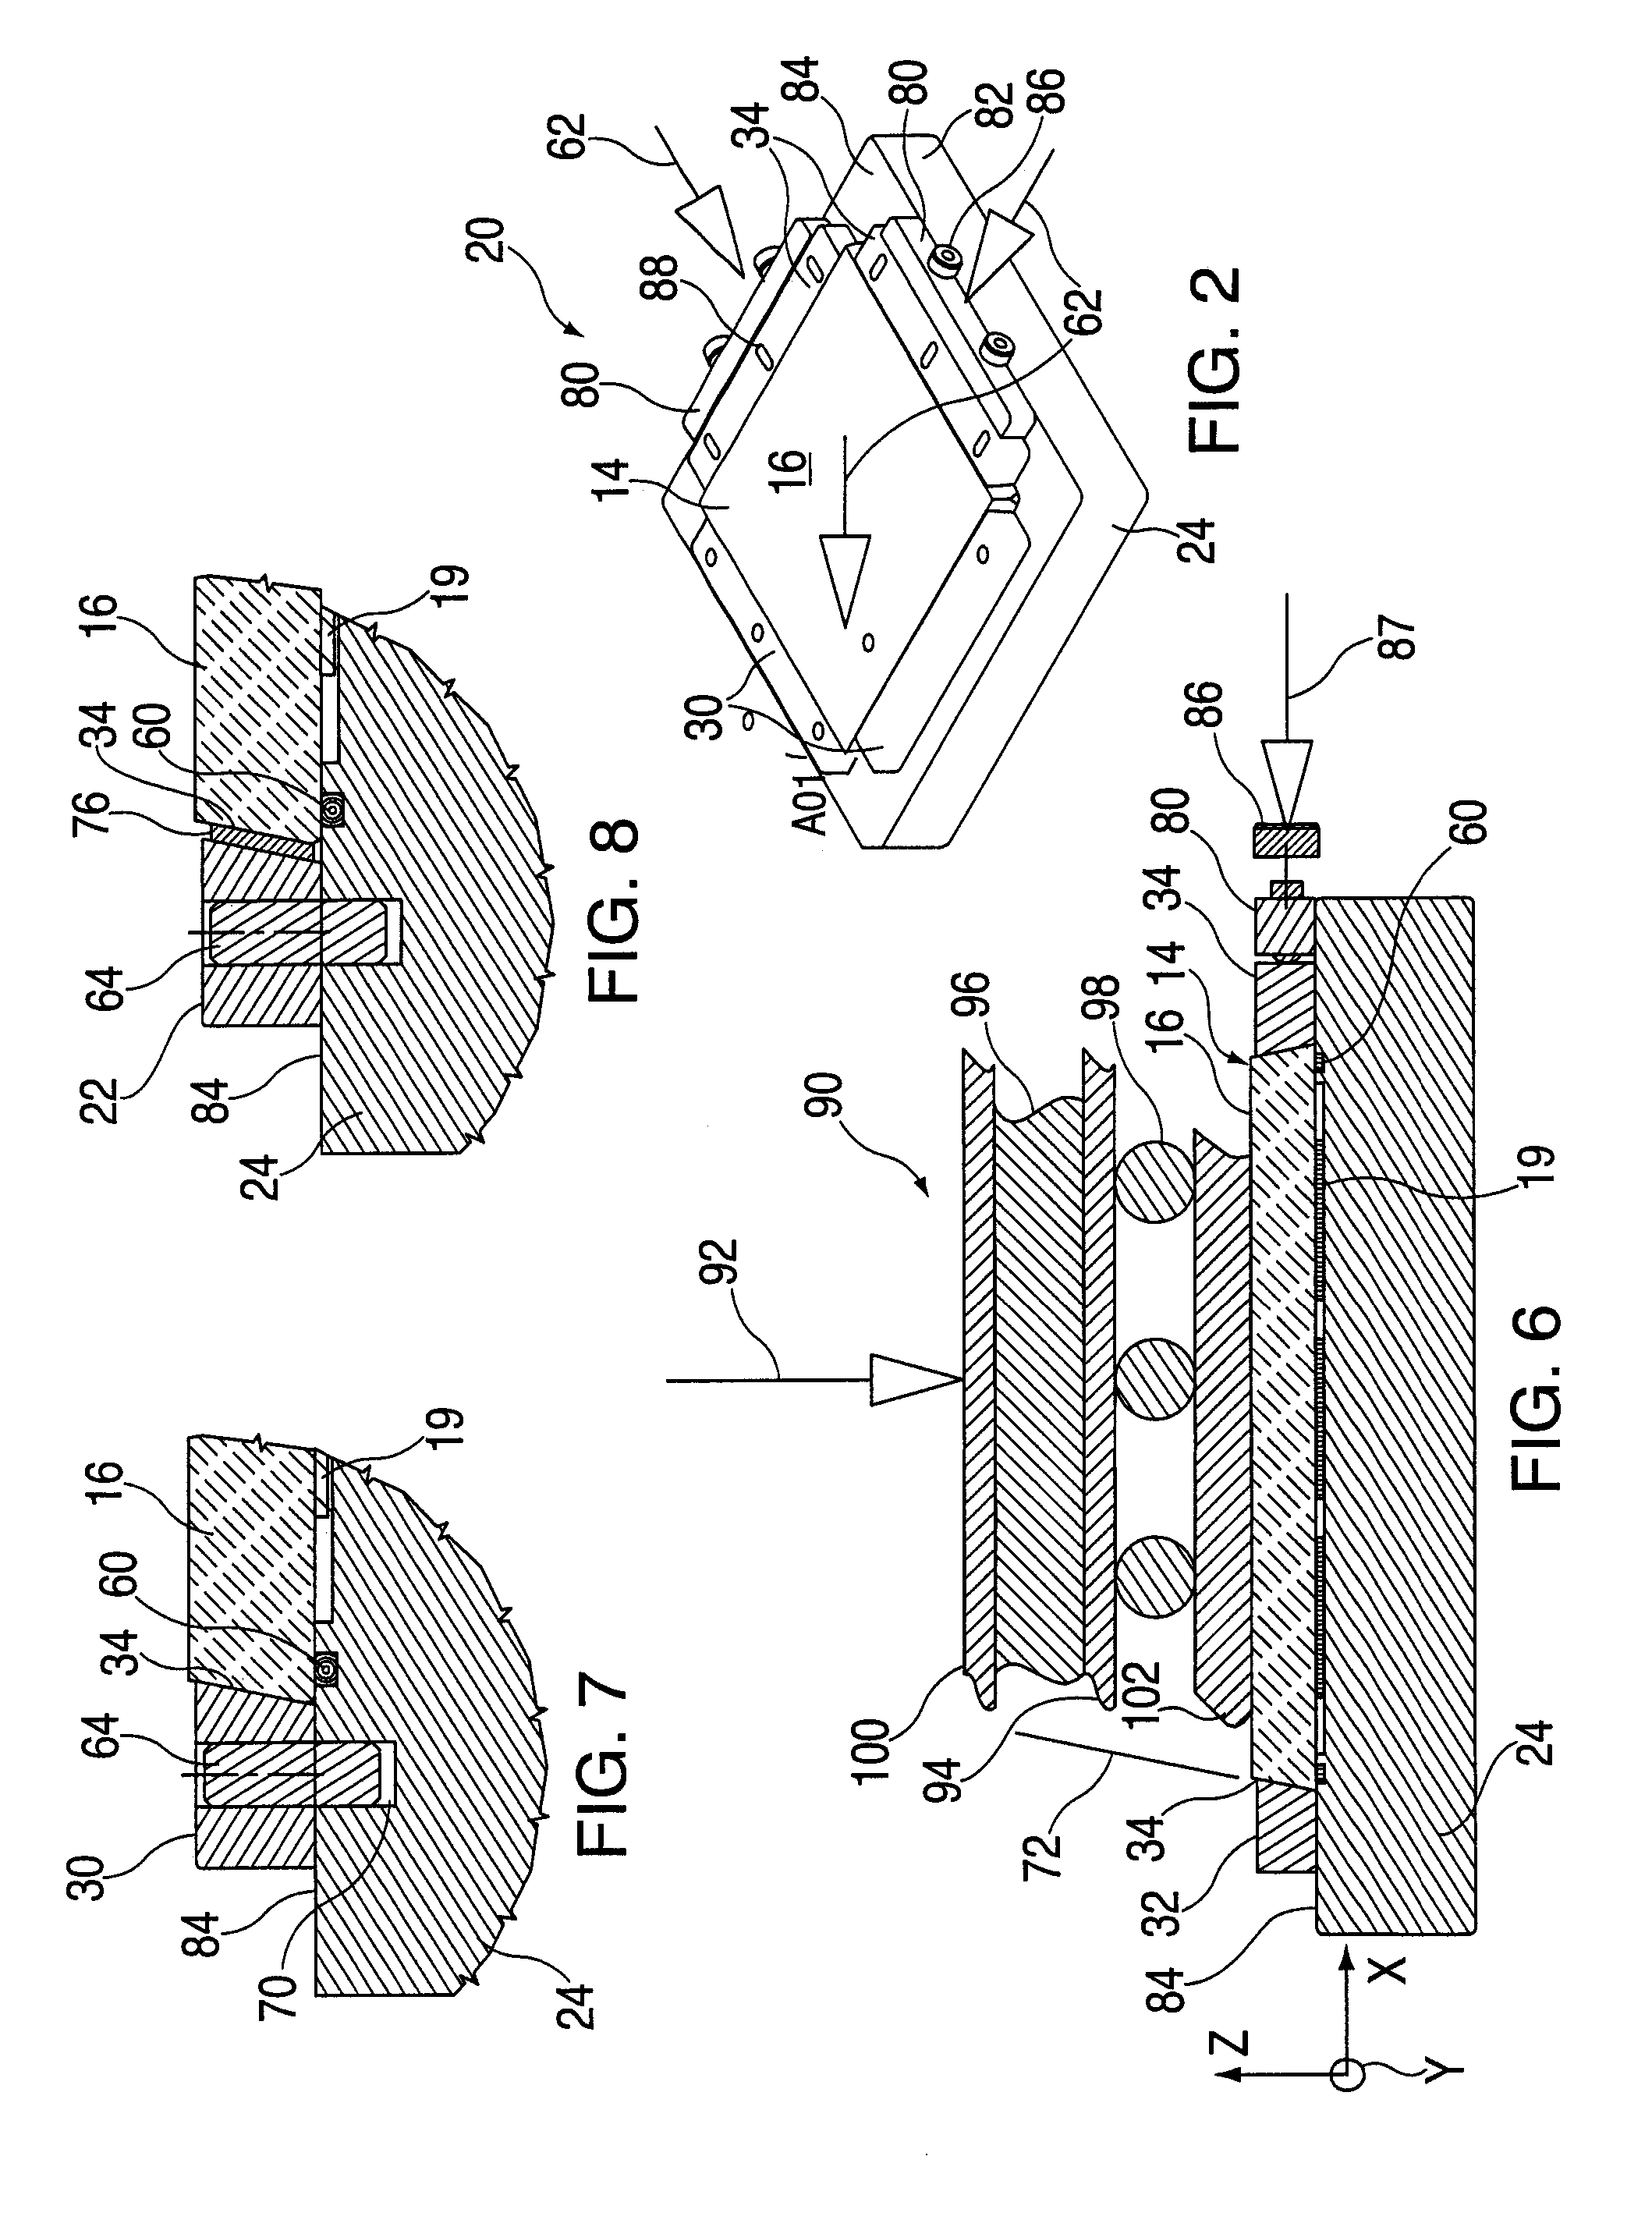 Method and apparatus to form a reworkable seal on an electronic module